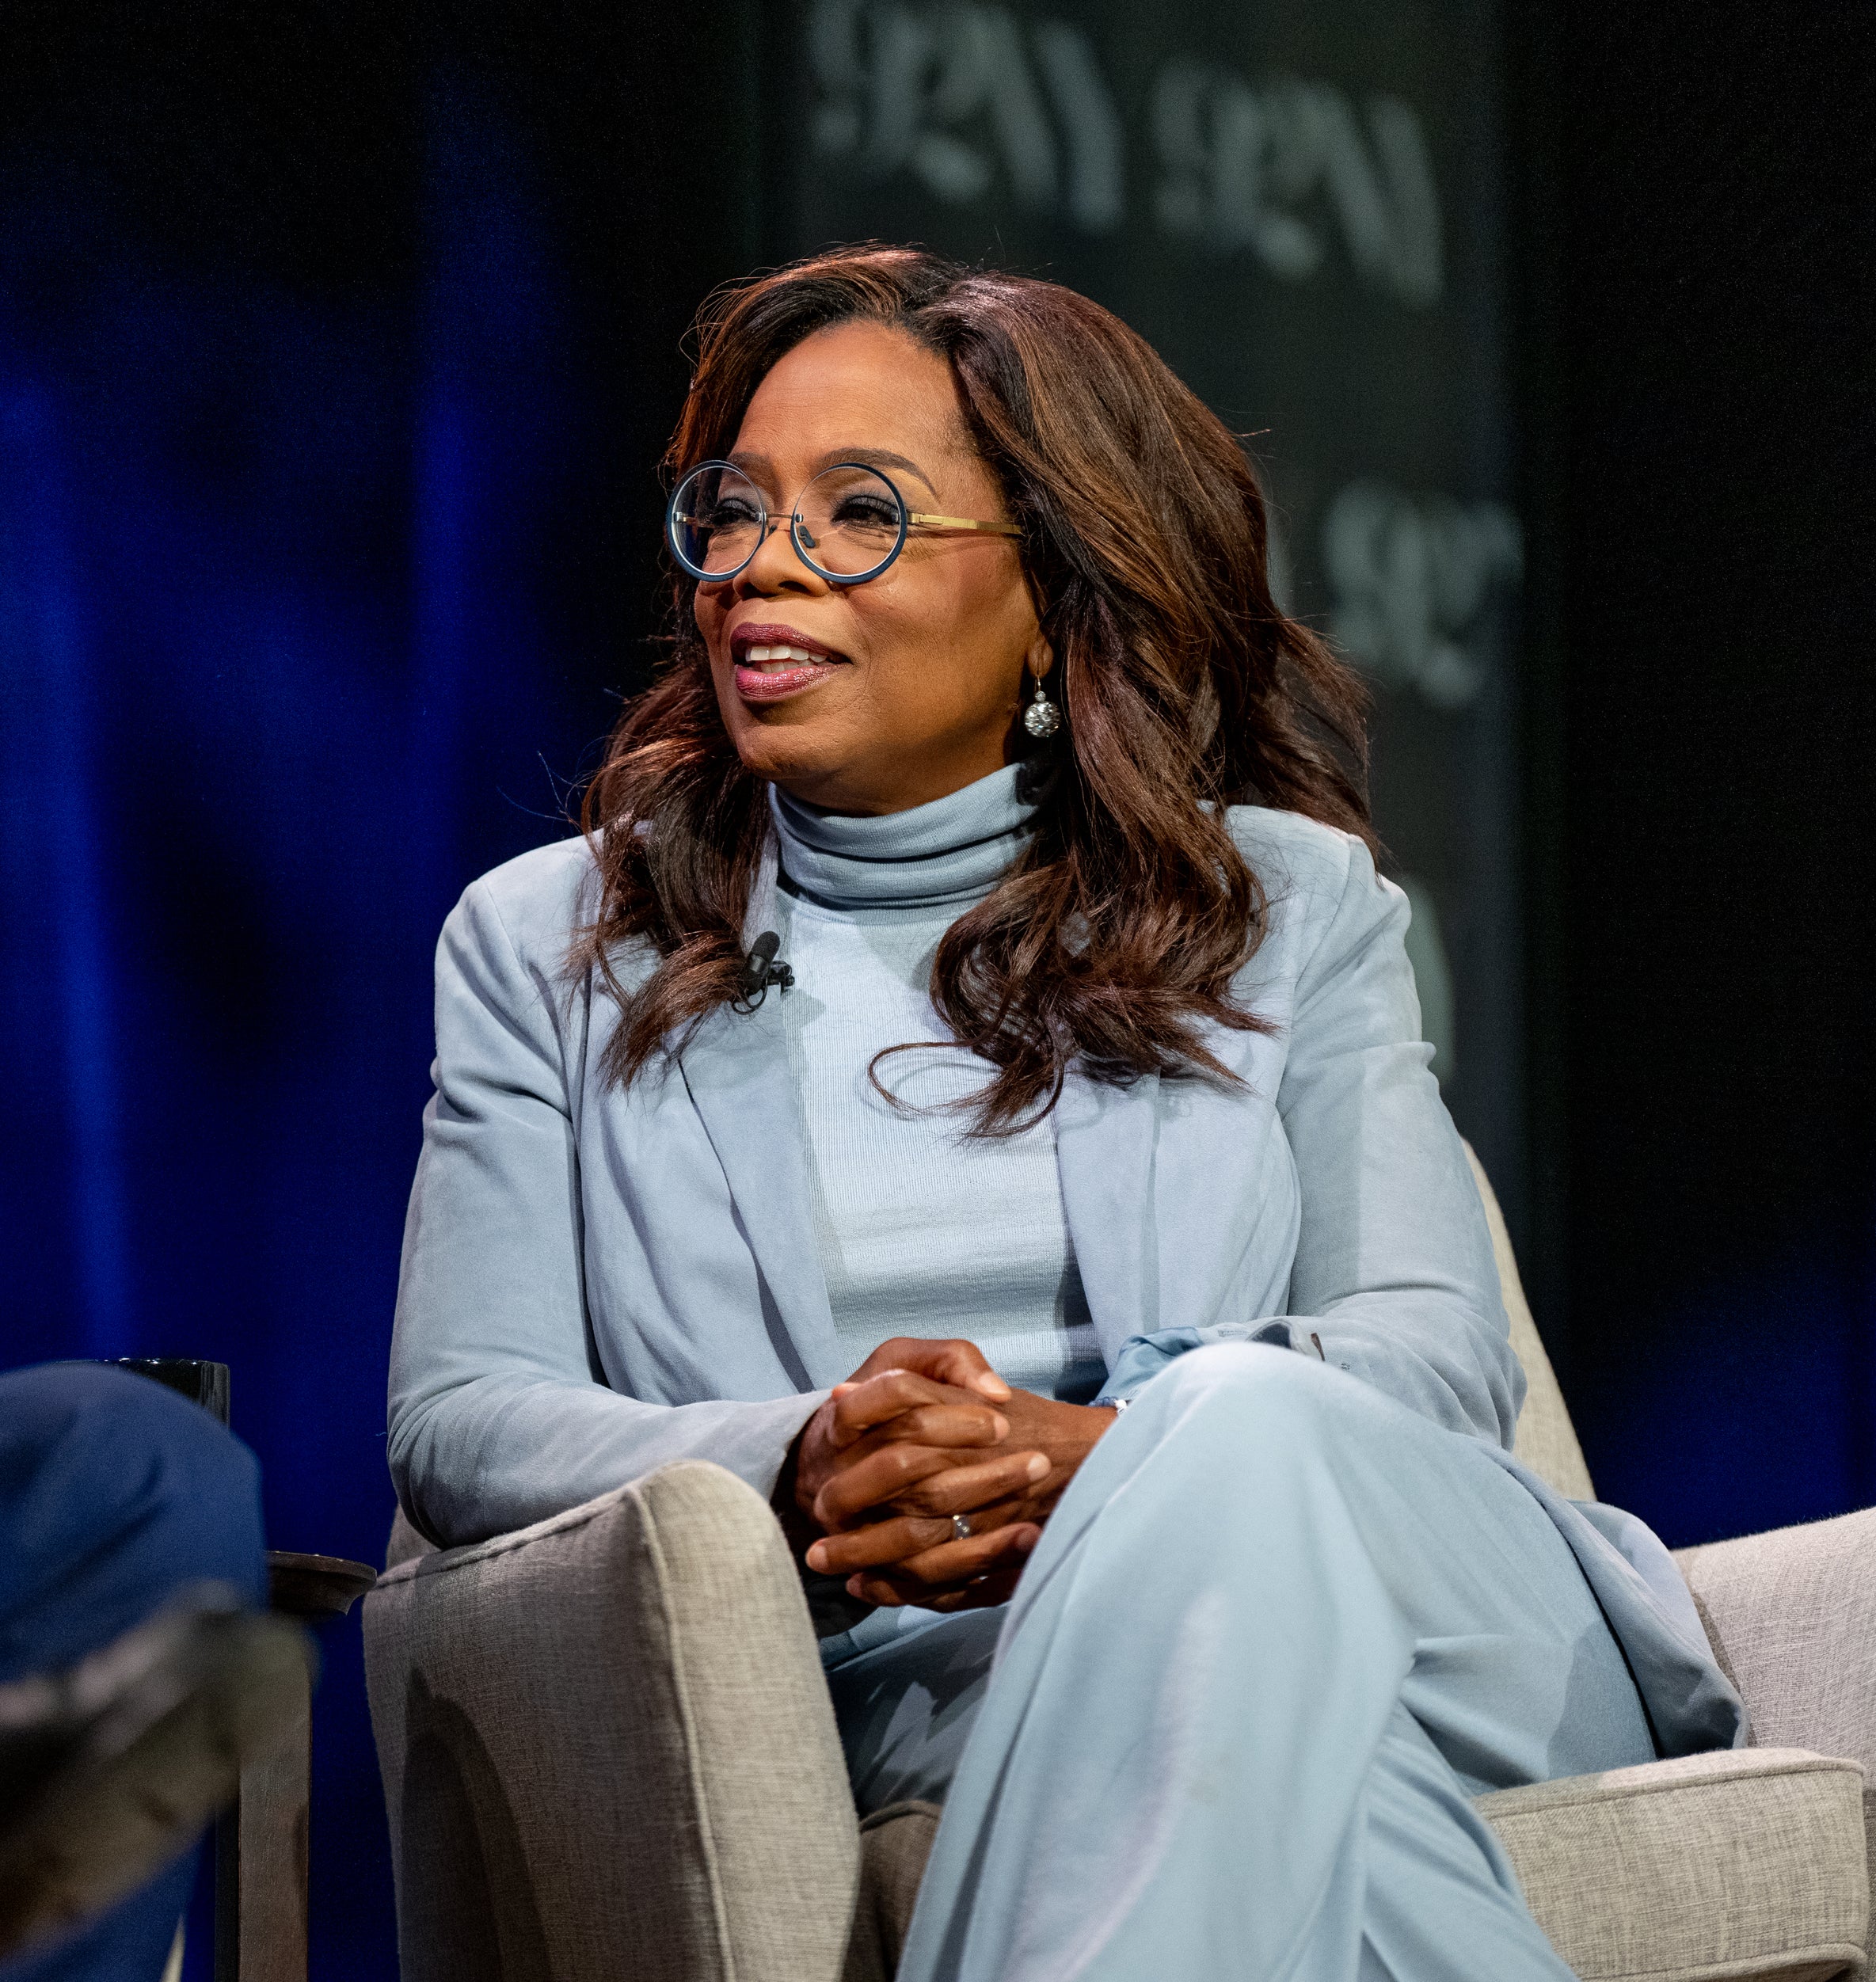 A close-up of Oprah sitting onstage